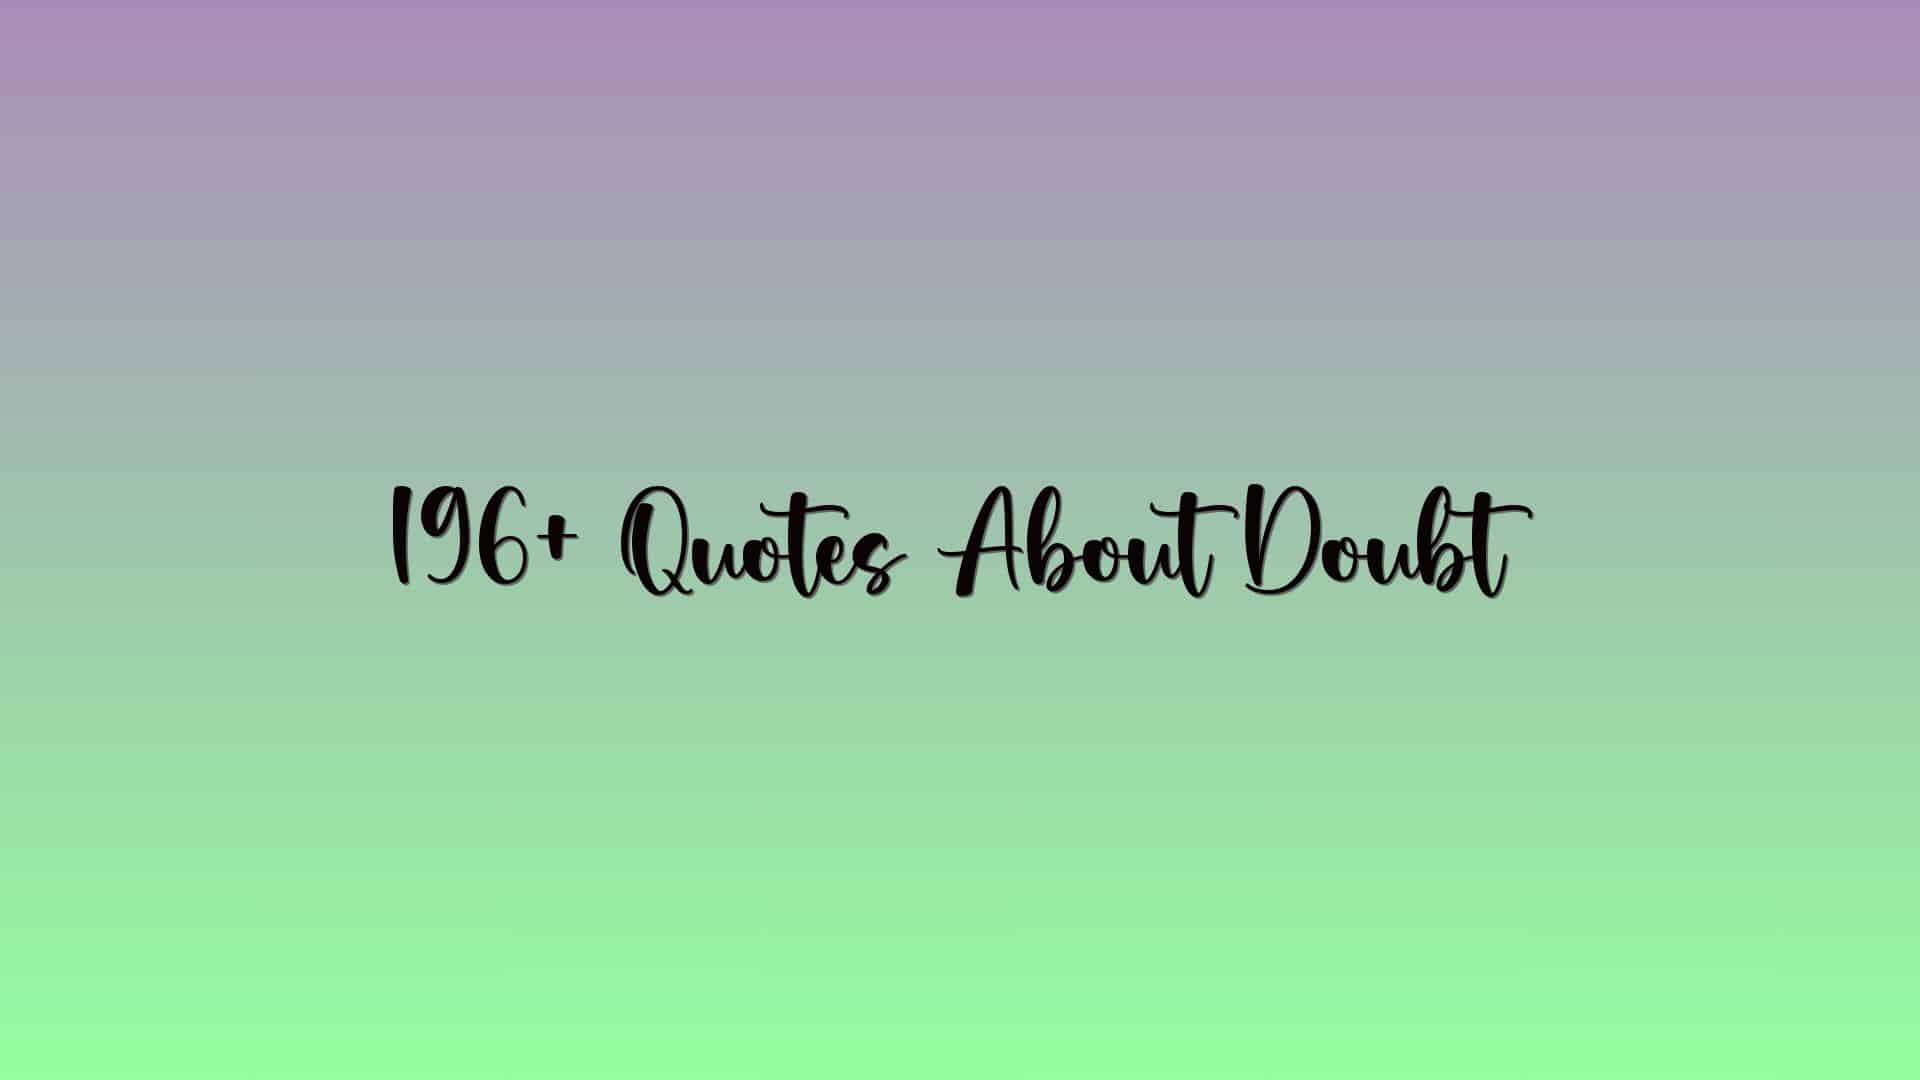 196+ Quotes About Doubt